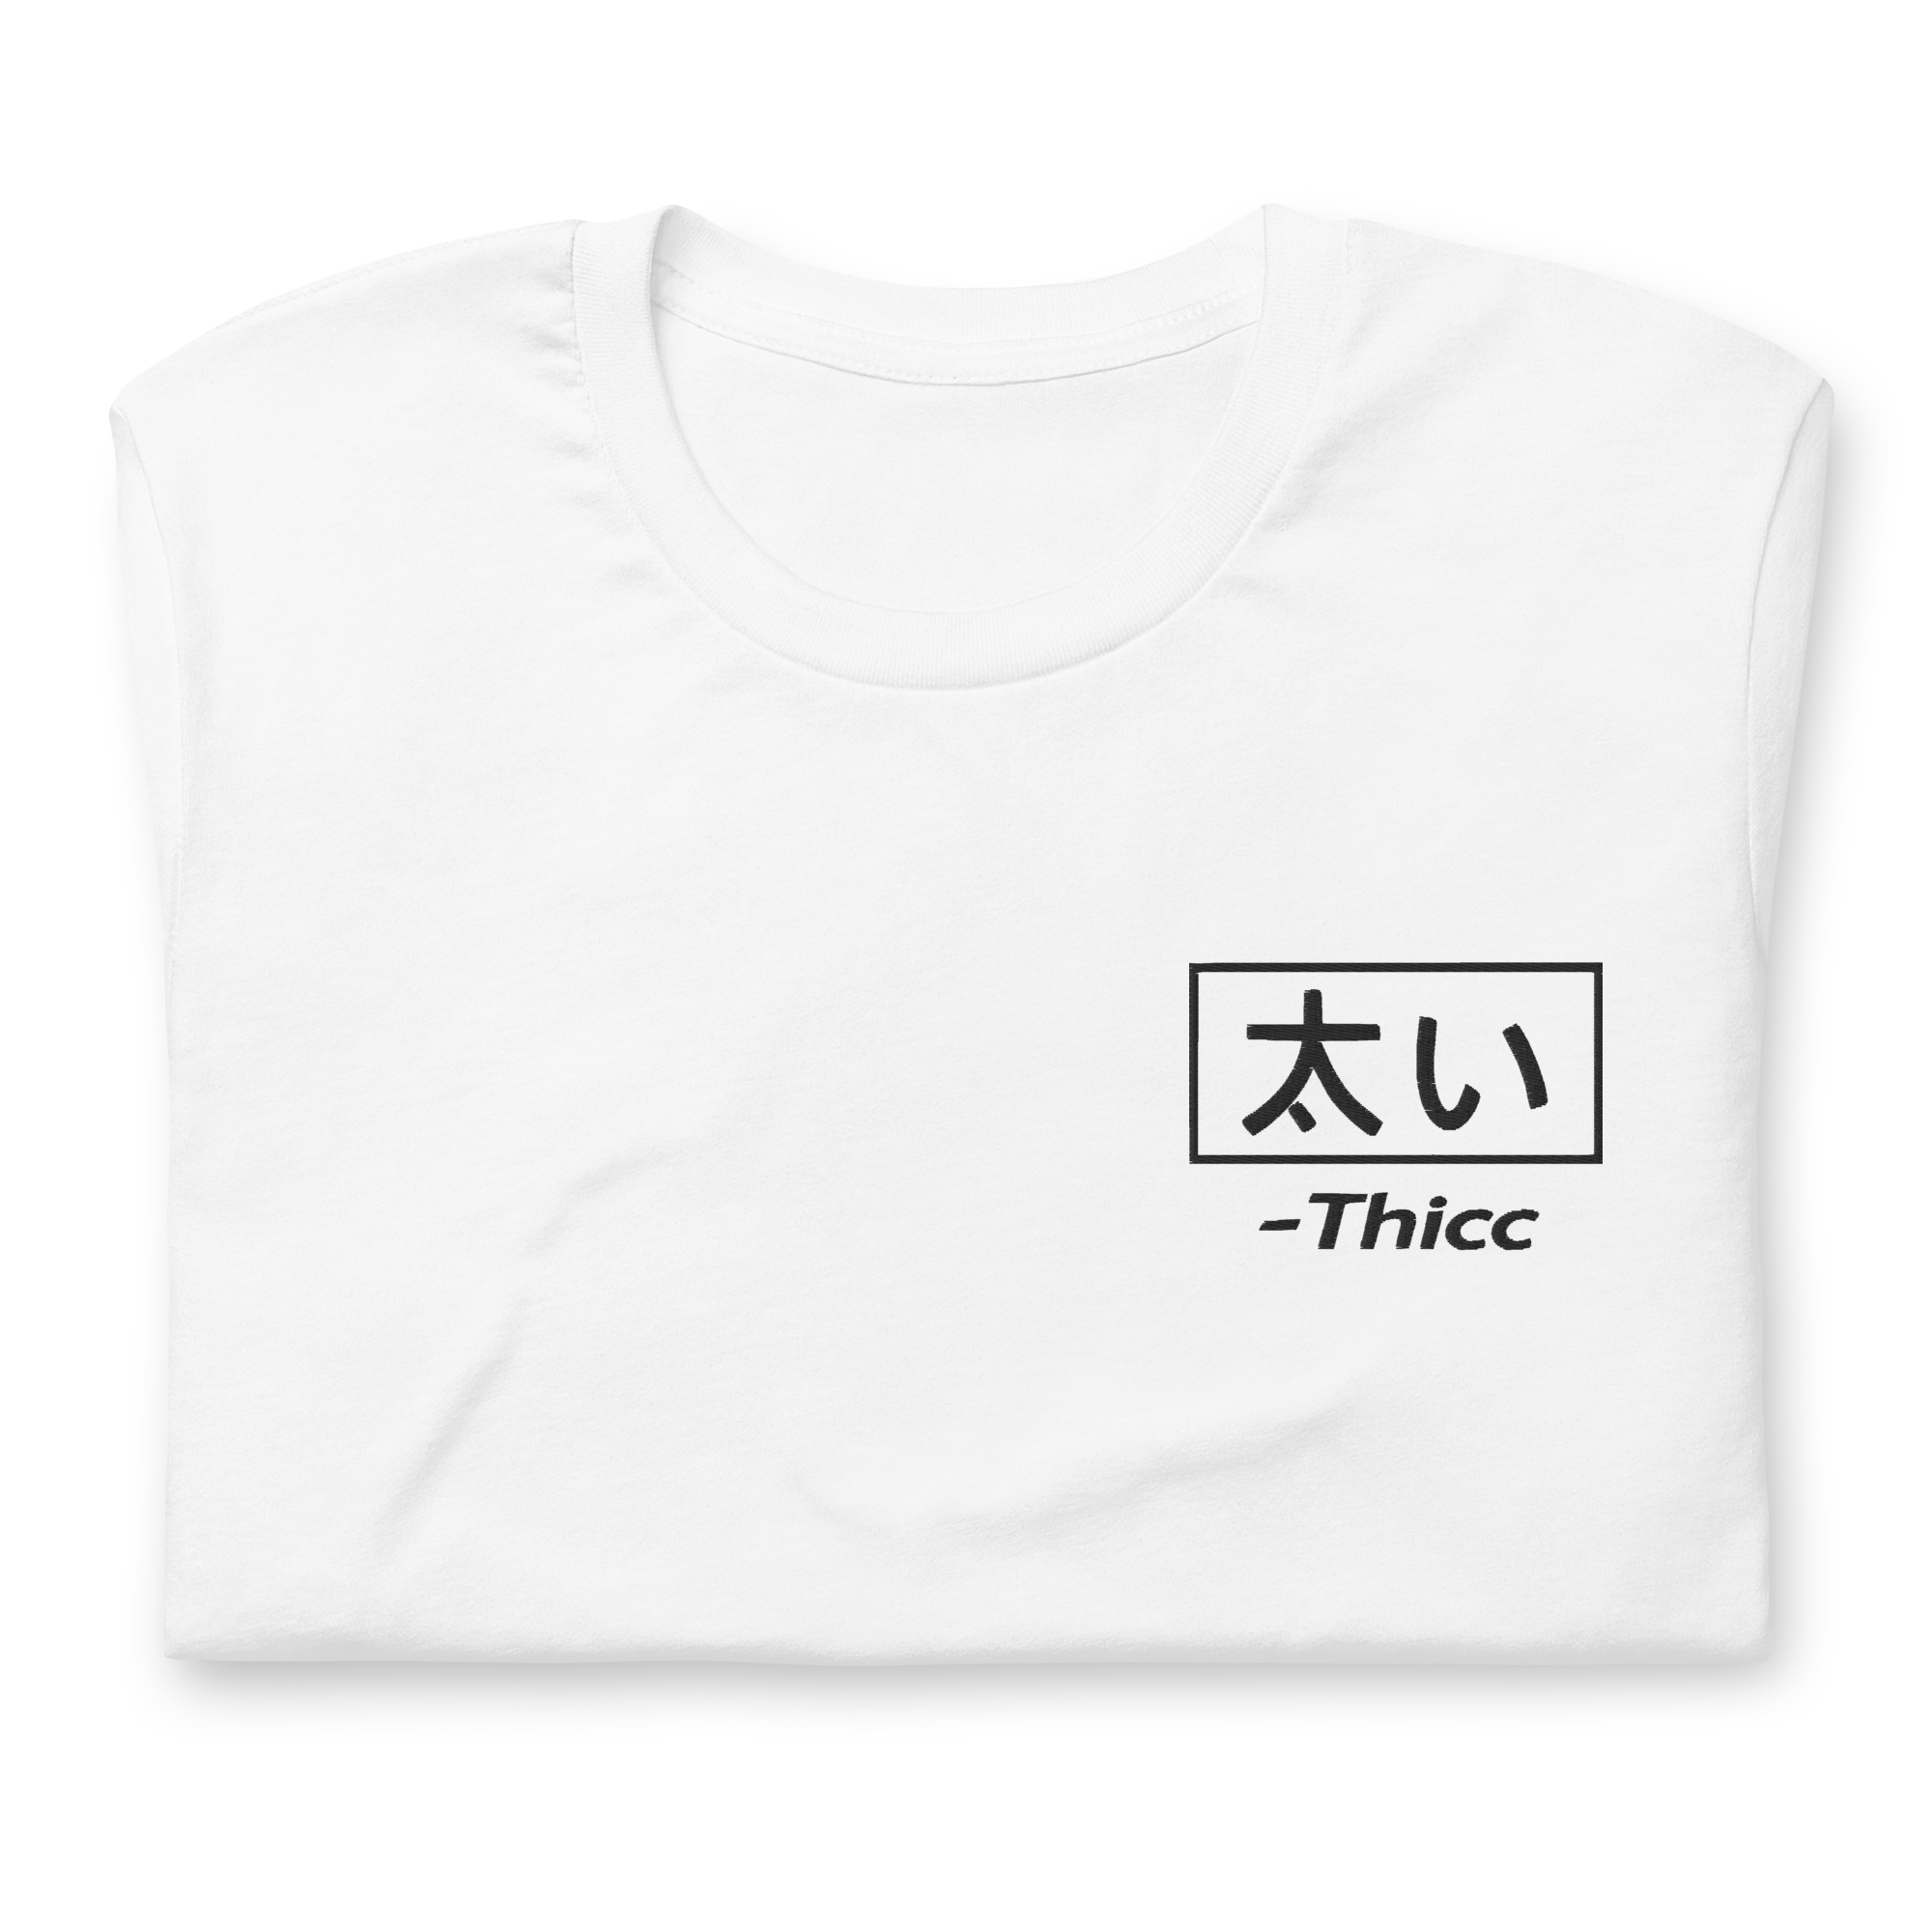 Thicc - Embroidery T-Shirt